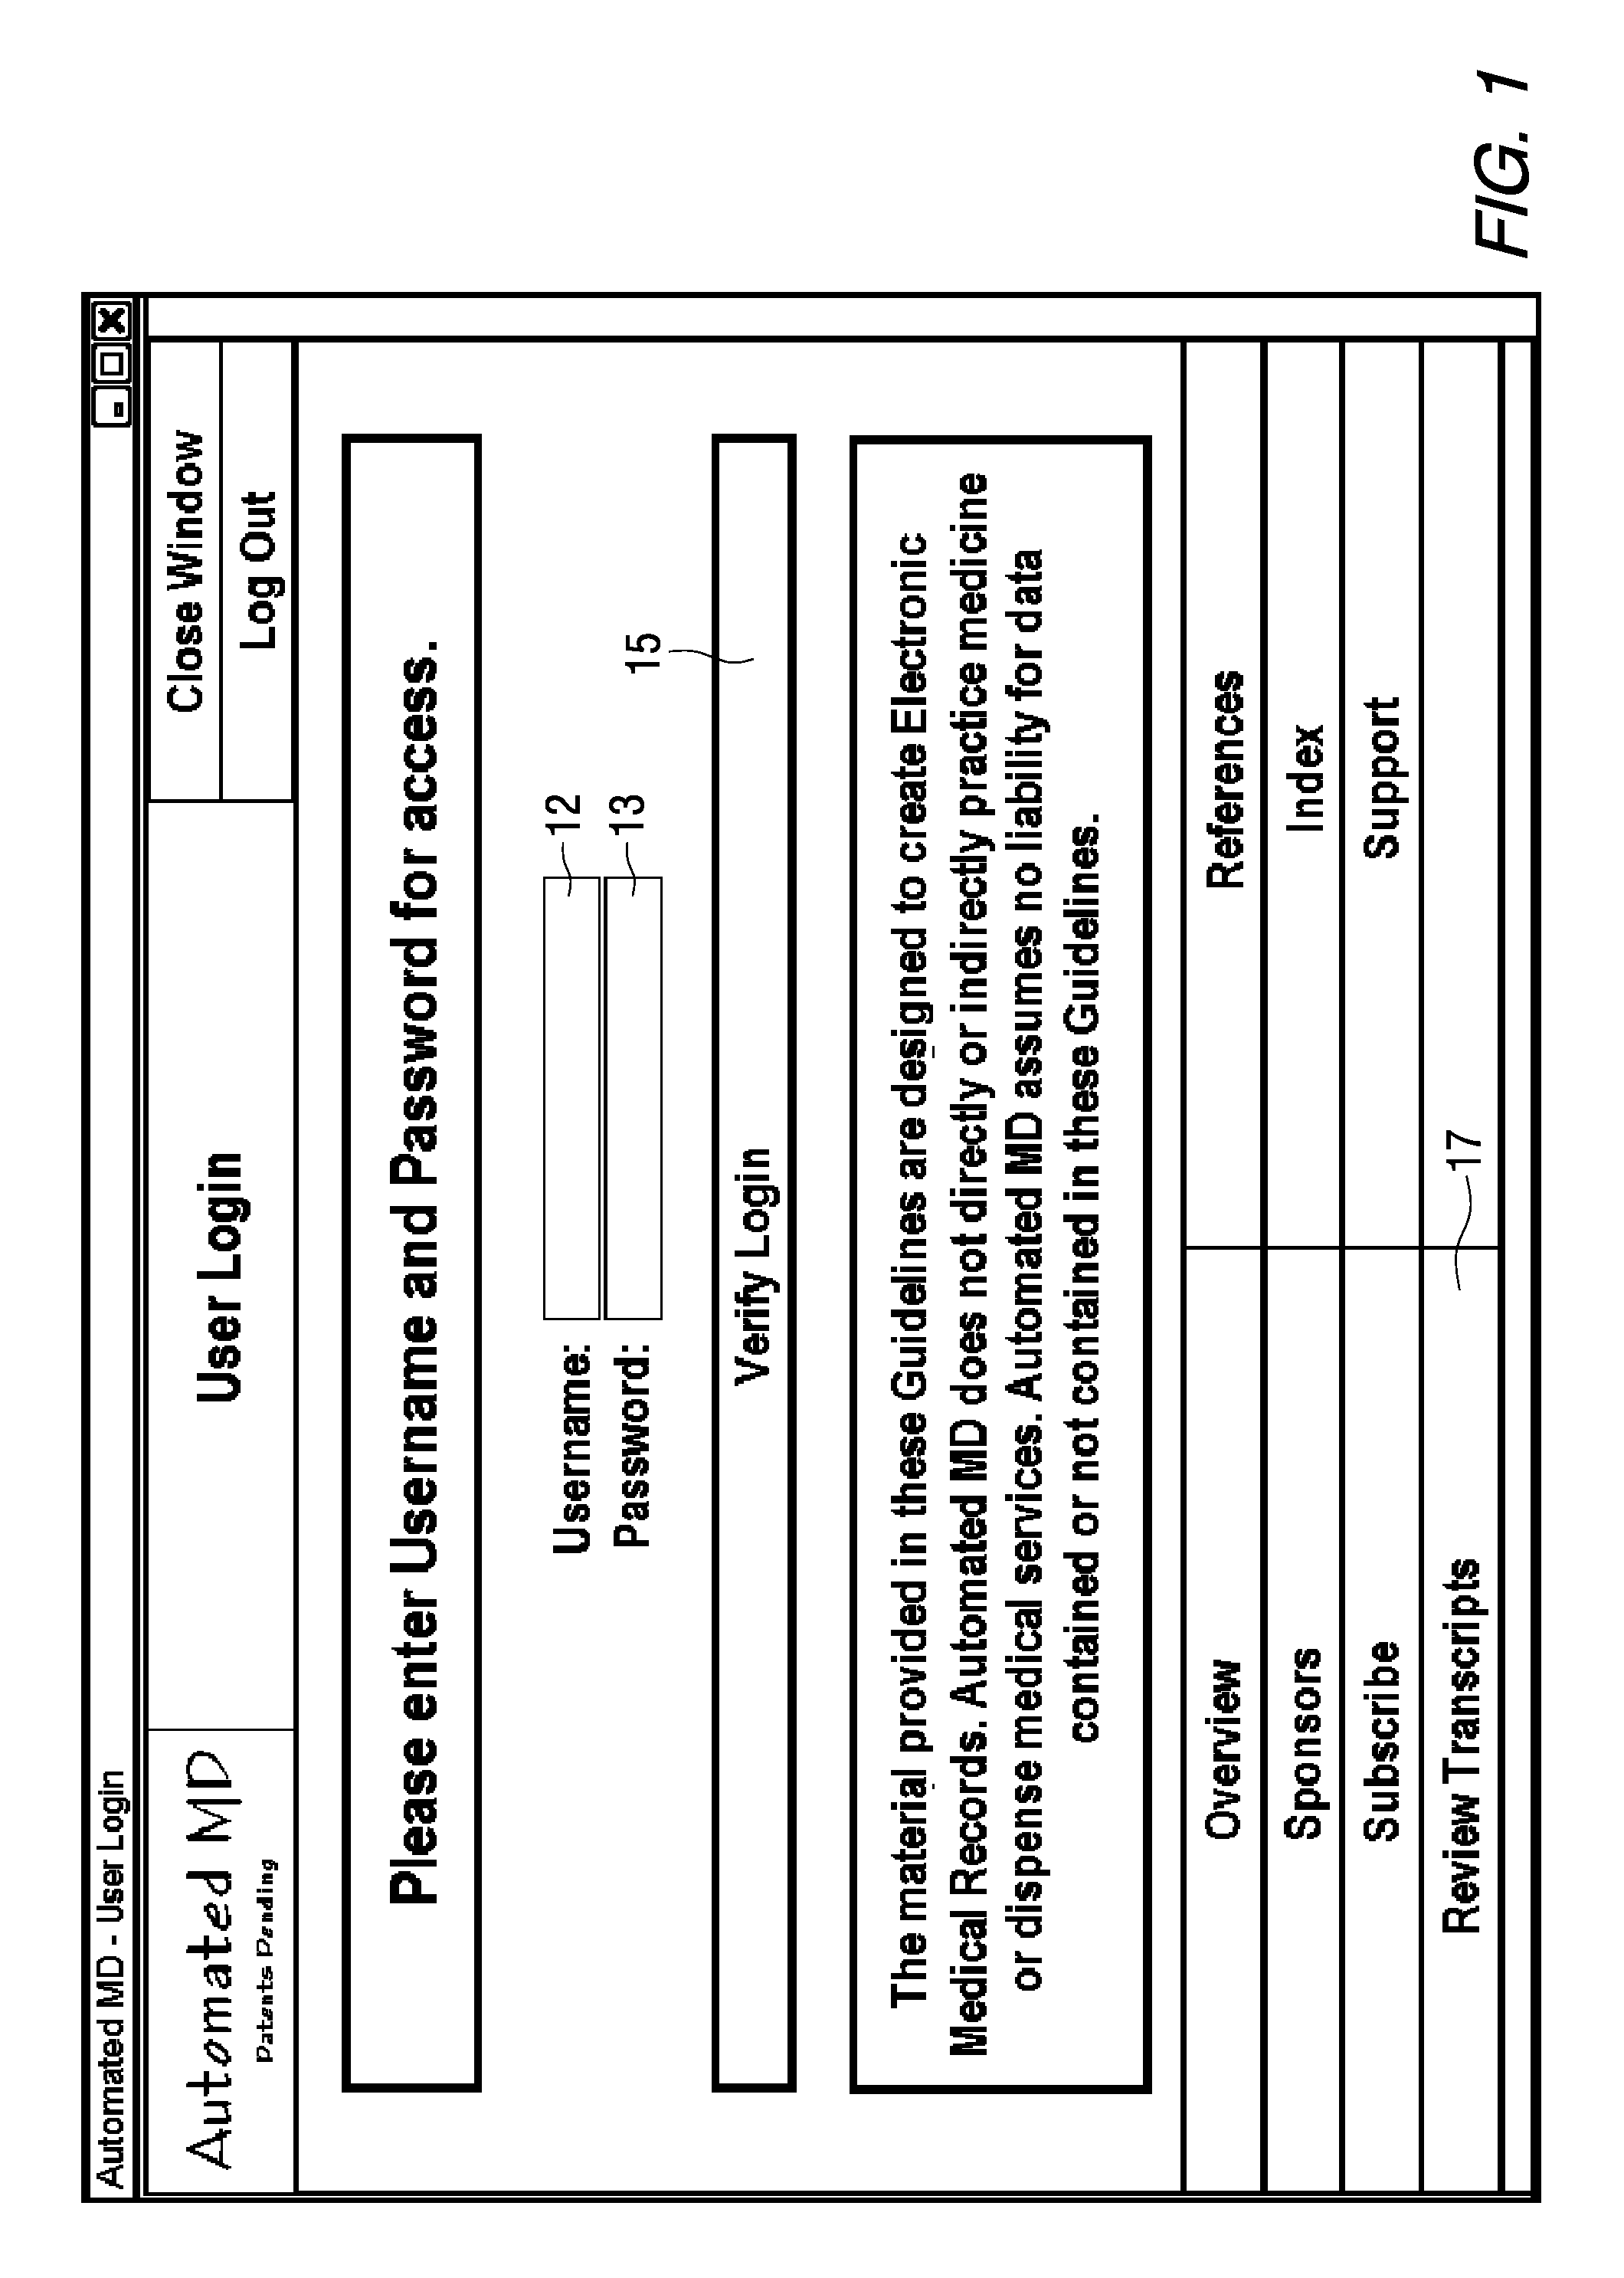 Apparatus, method and software for developing electronic documentation of imaging modalities, other radiological findings and physical examinations